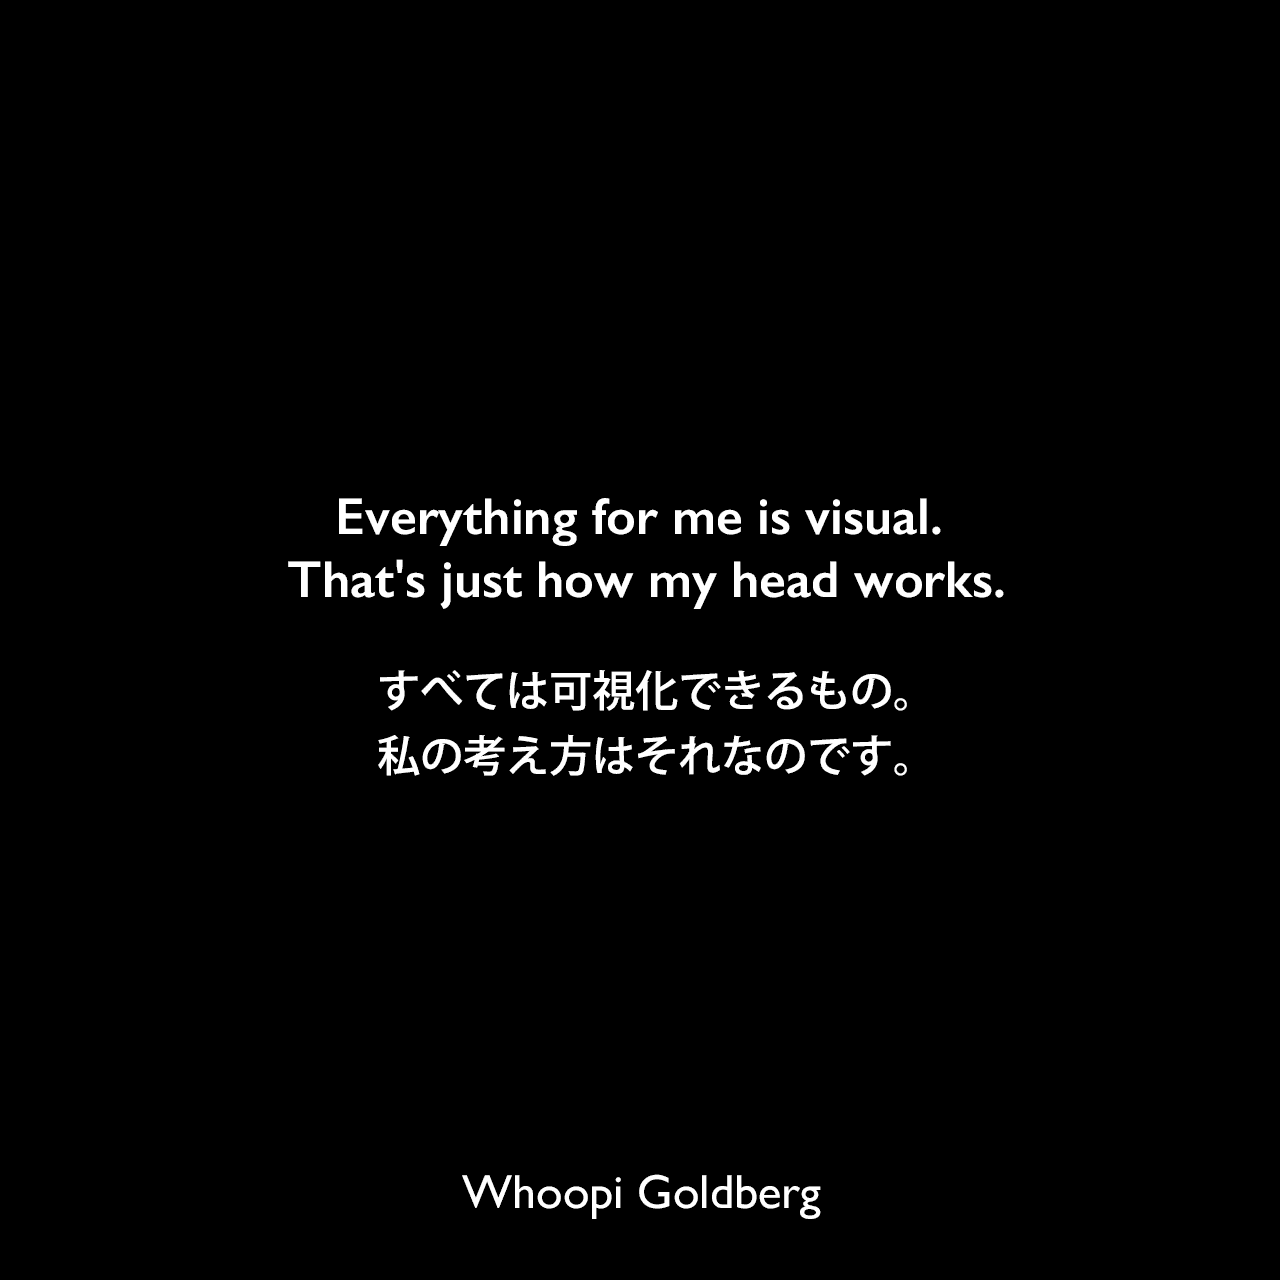 Everything for me is visual. That's just how my head works.すべては可視化できるもの。私の考え方はそれなのです。Whoopi Goldberg